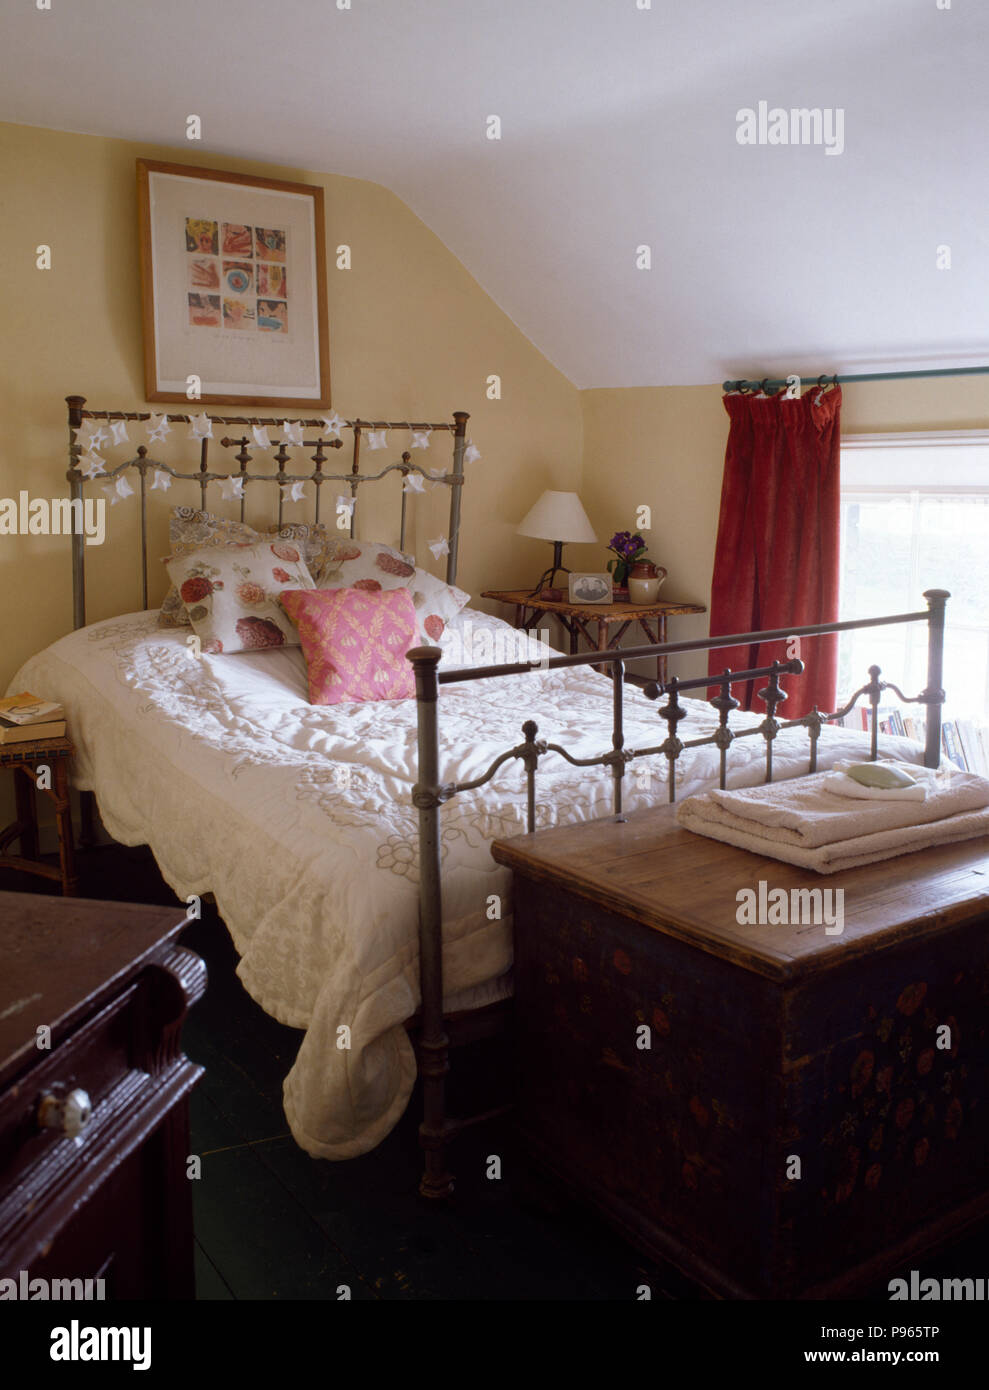 White quilt on vintage brass bed in cottage bedroom with a painted wooden chest at the foot of the bed Stock Photo